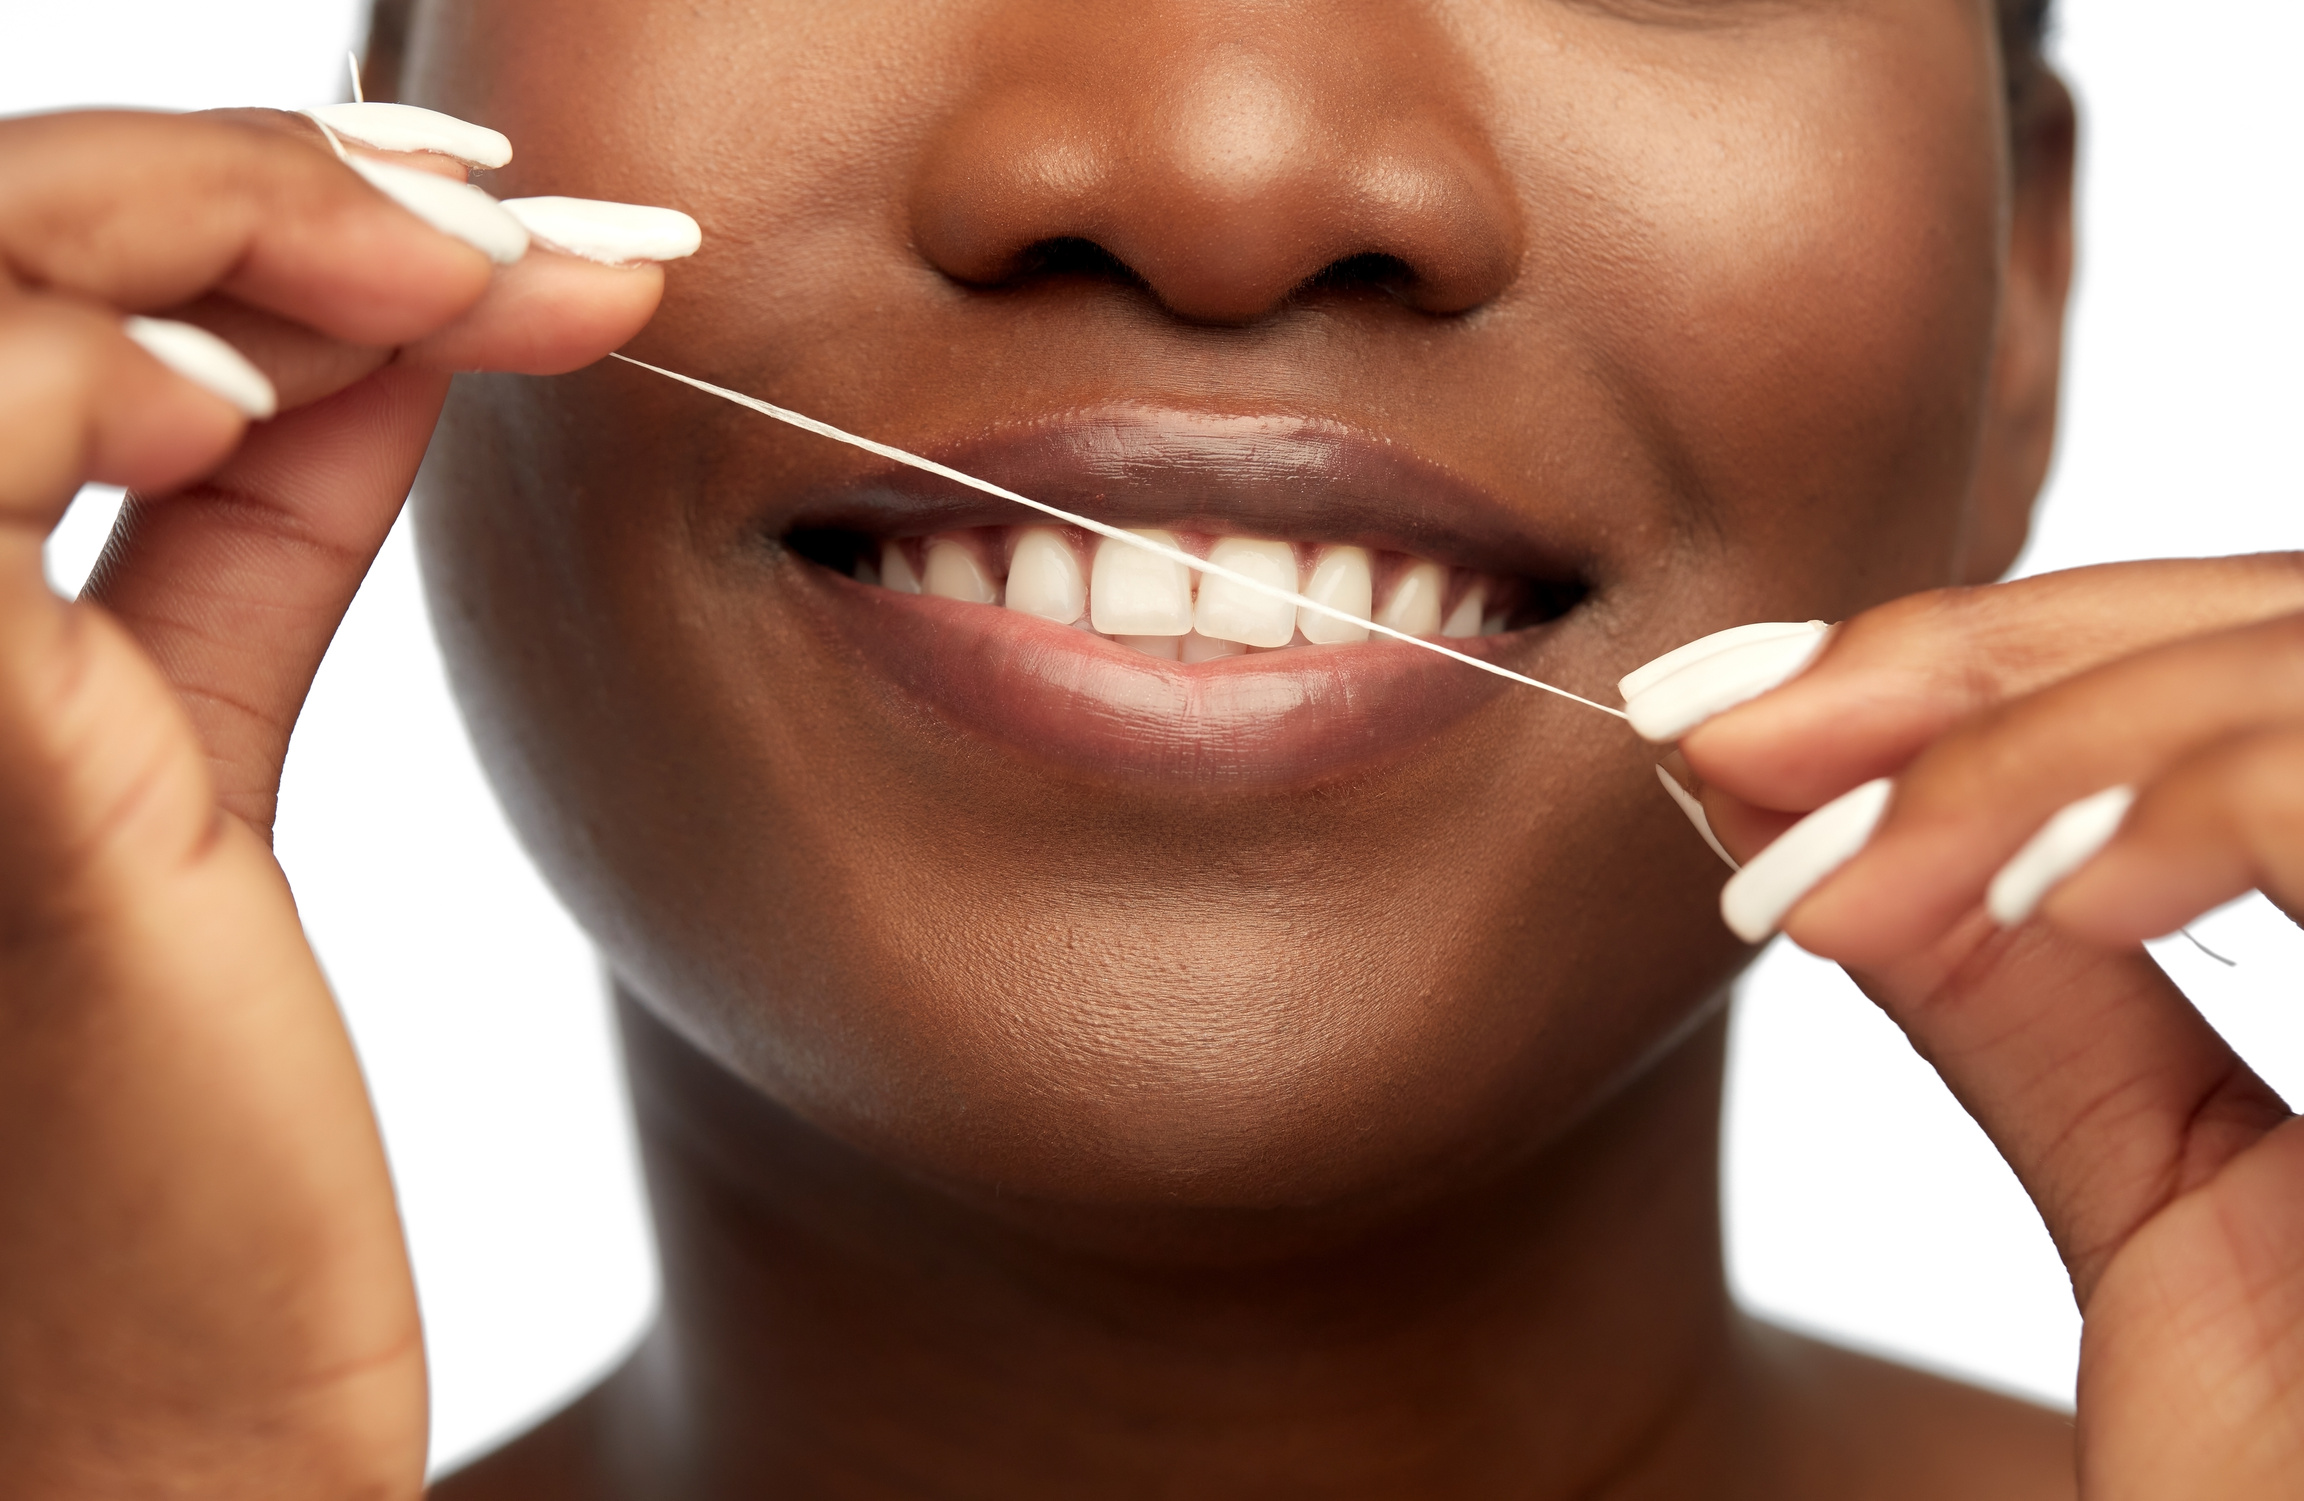 African Woman Cleaning Teeth with Dental Floss